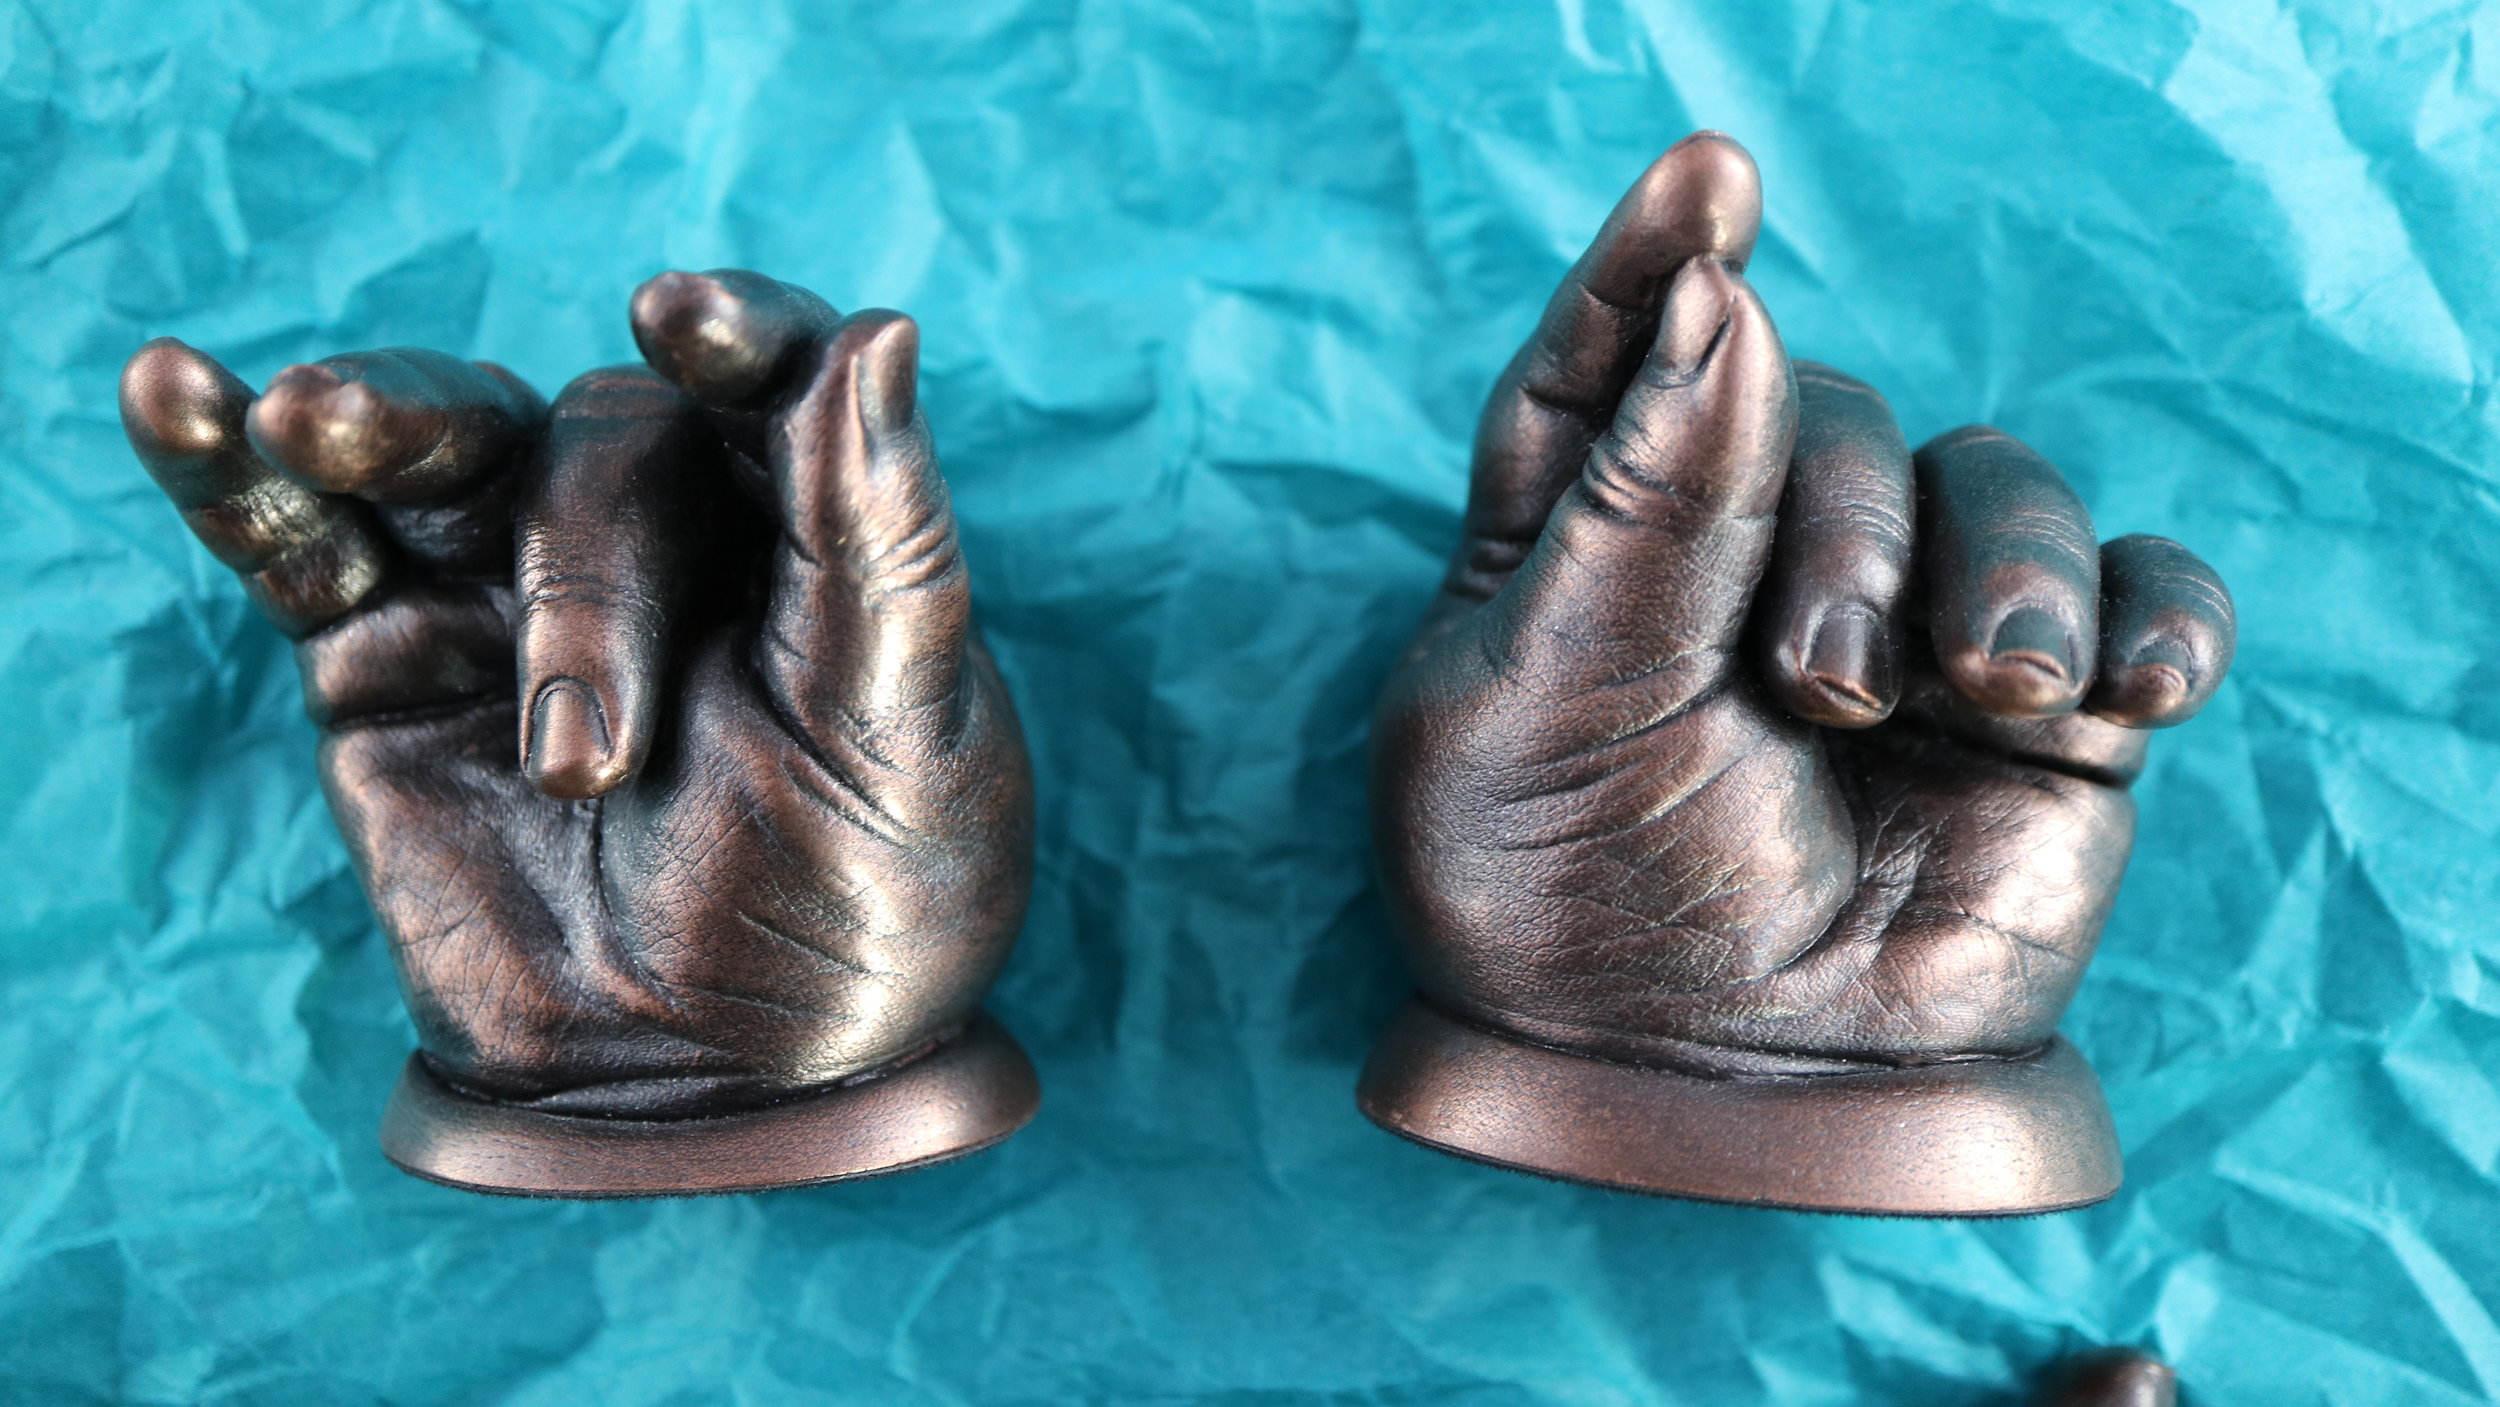 Real Bronze Adult Couples Family Clasped Hand Cast Metal Casting by BabyRice